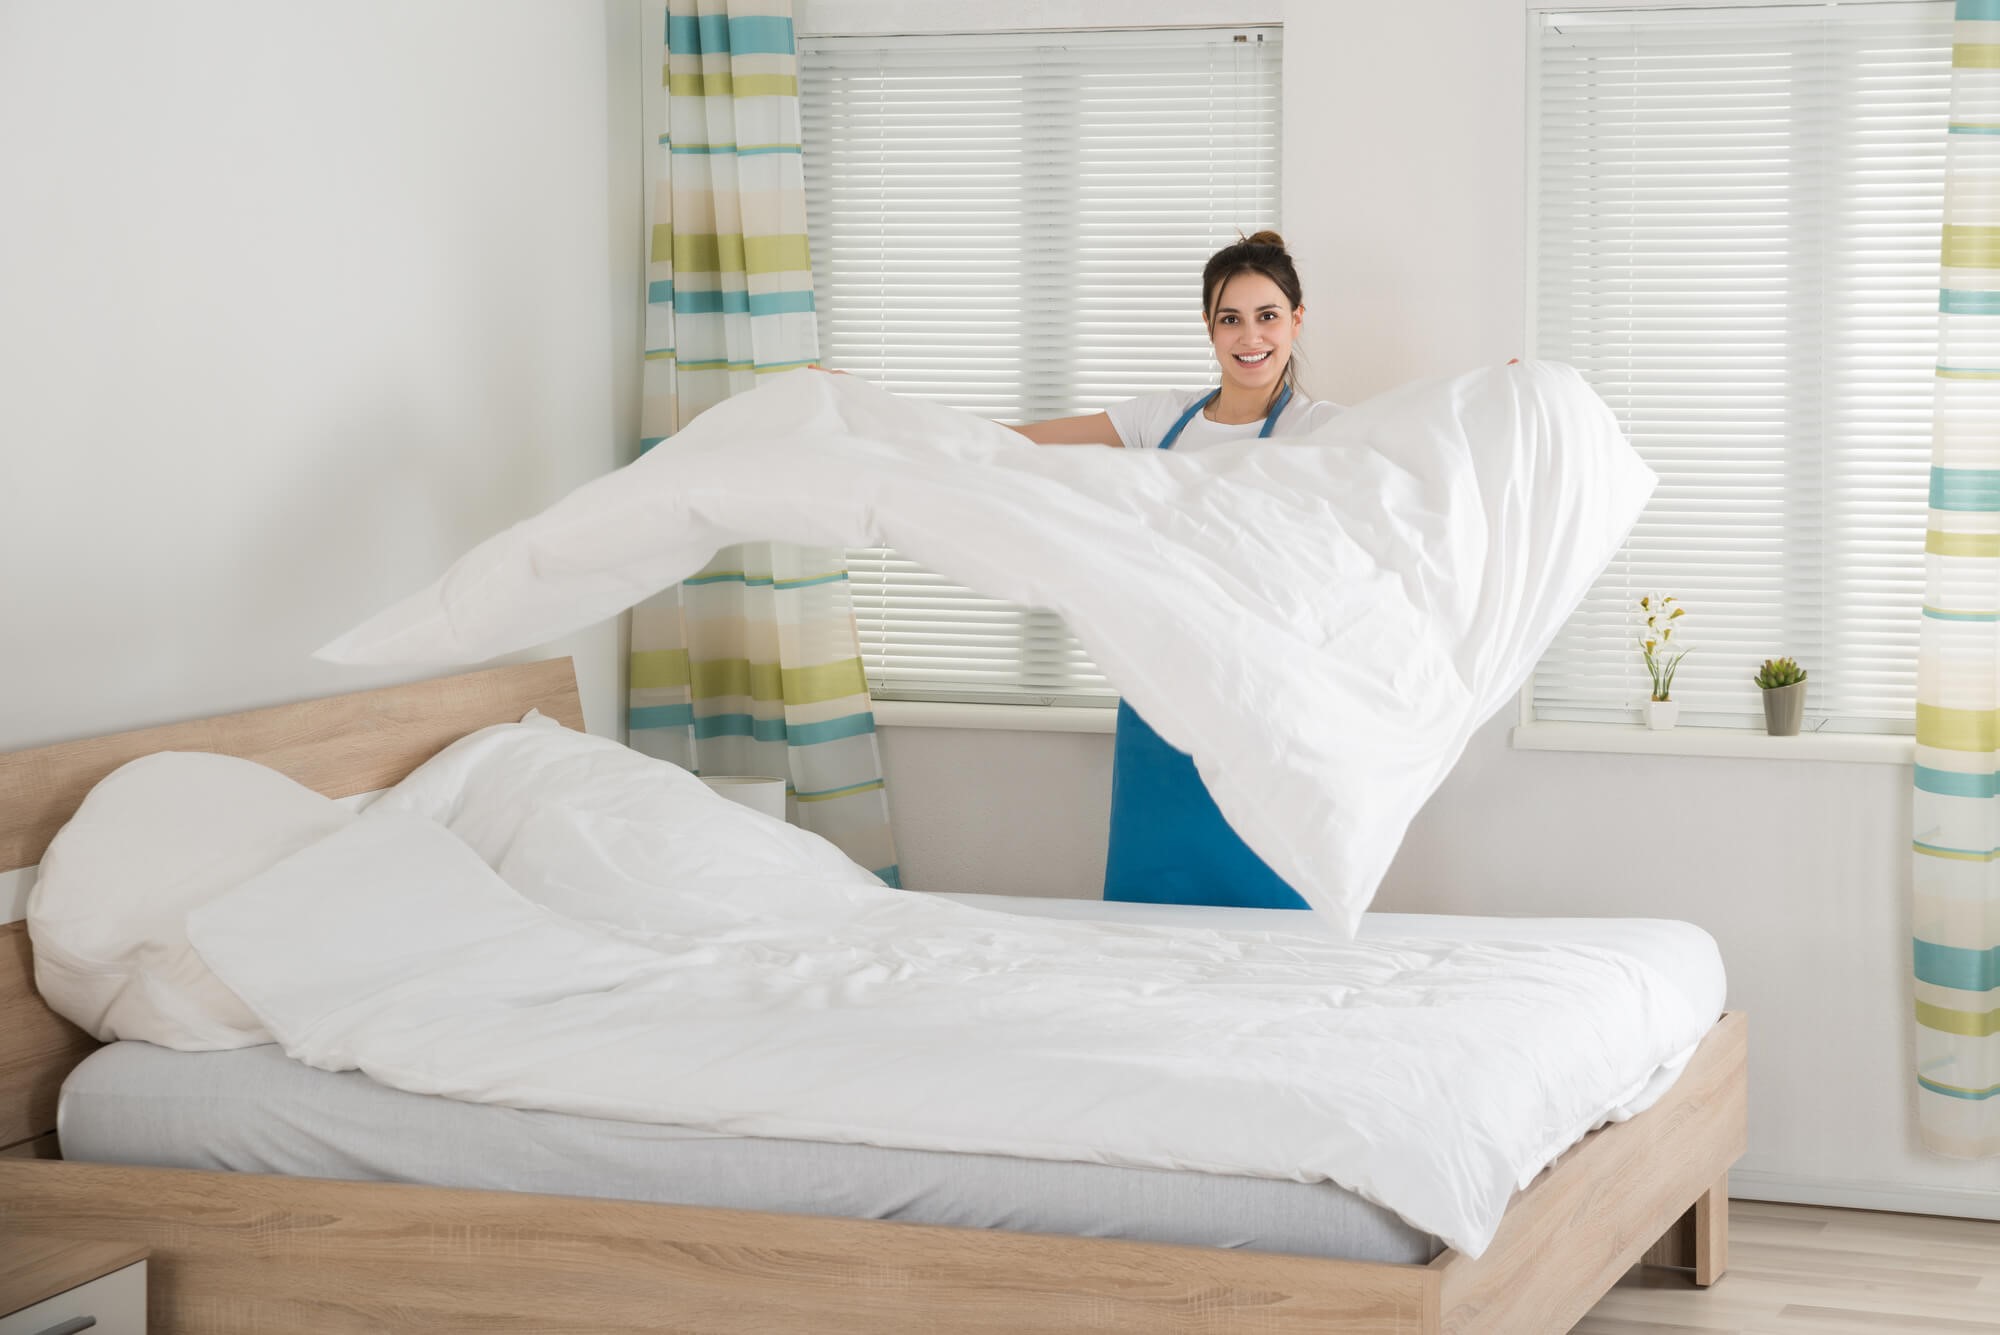 Removing Odor From The Mattress